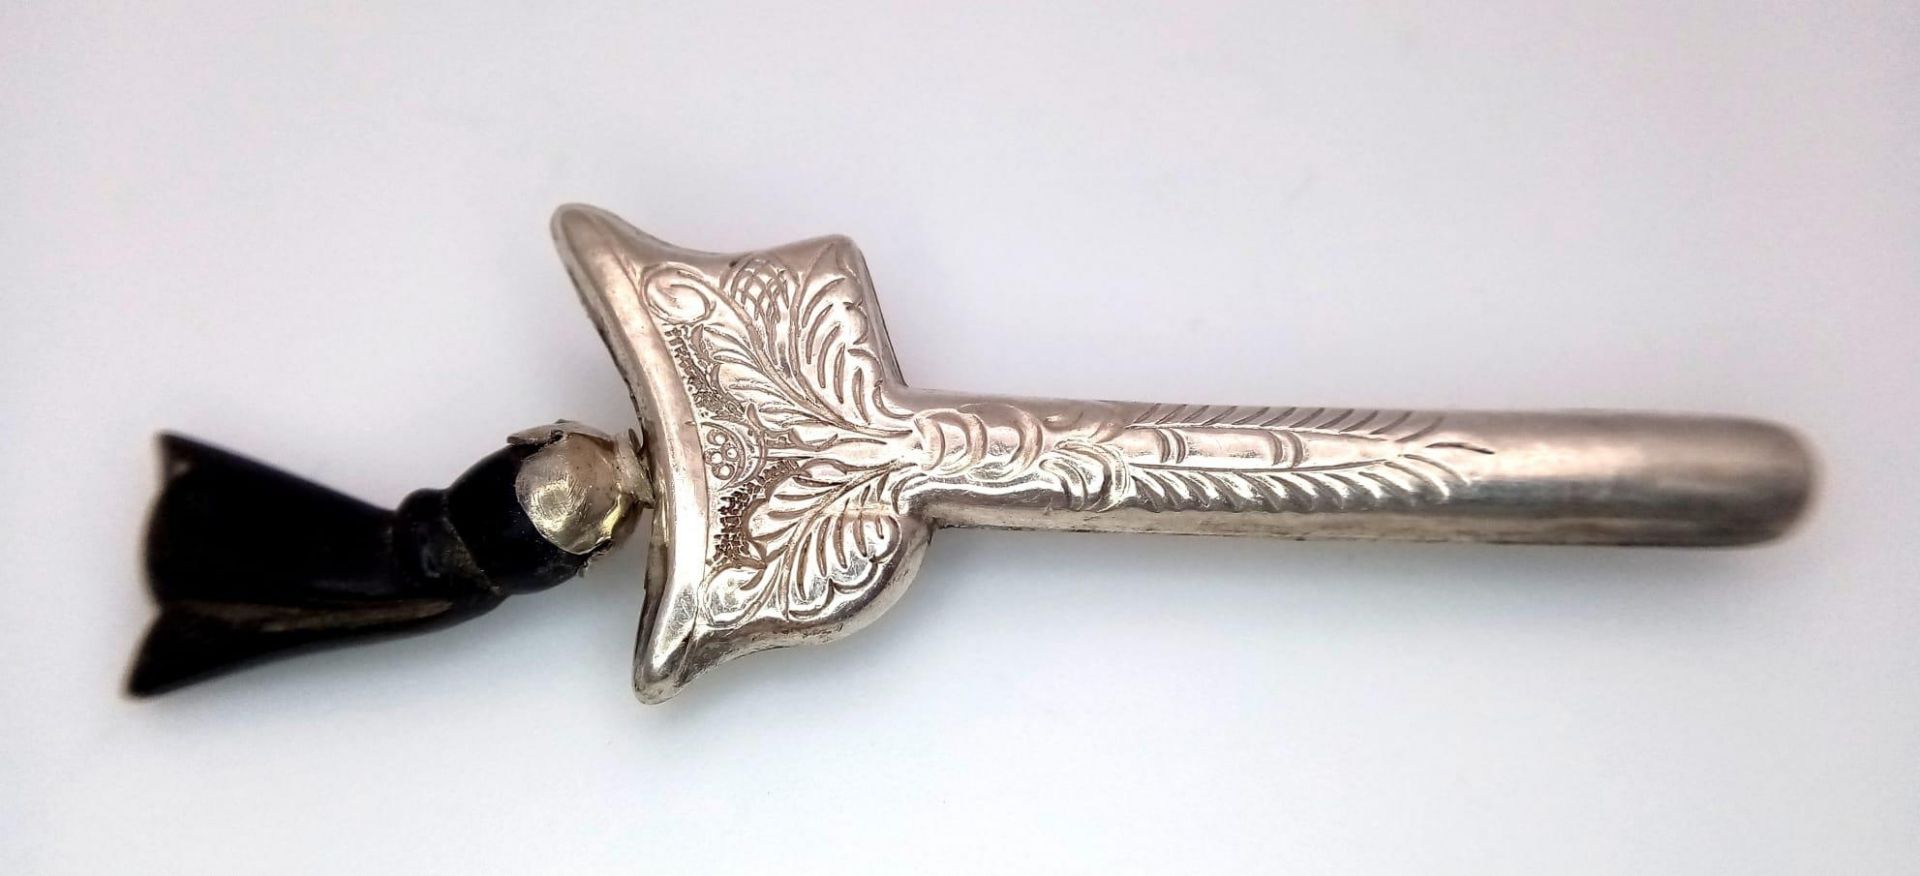 A Vintage or Antique Silver and Horn Handle Kris Knife and Sheathe Bar Brooch. Knife is - Bild 2 aus 4